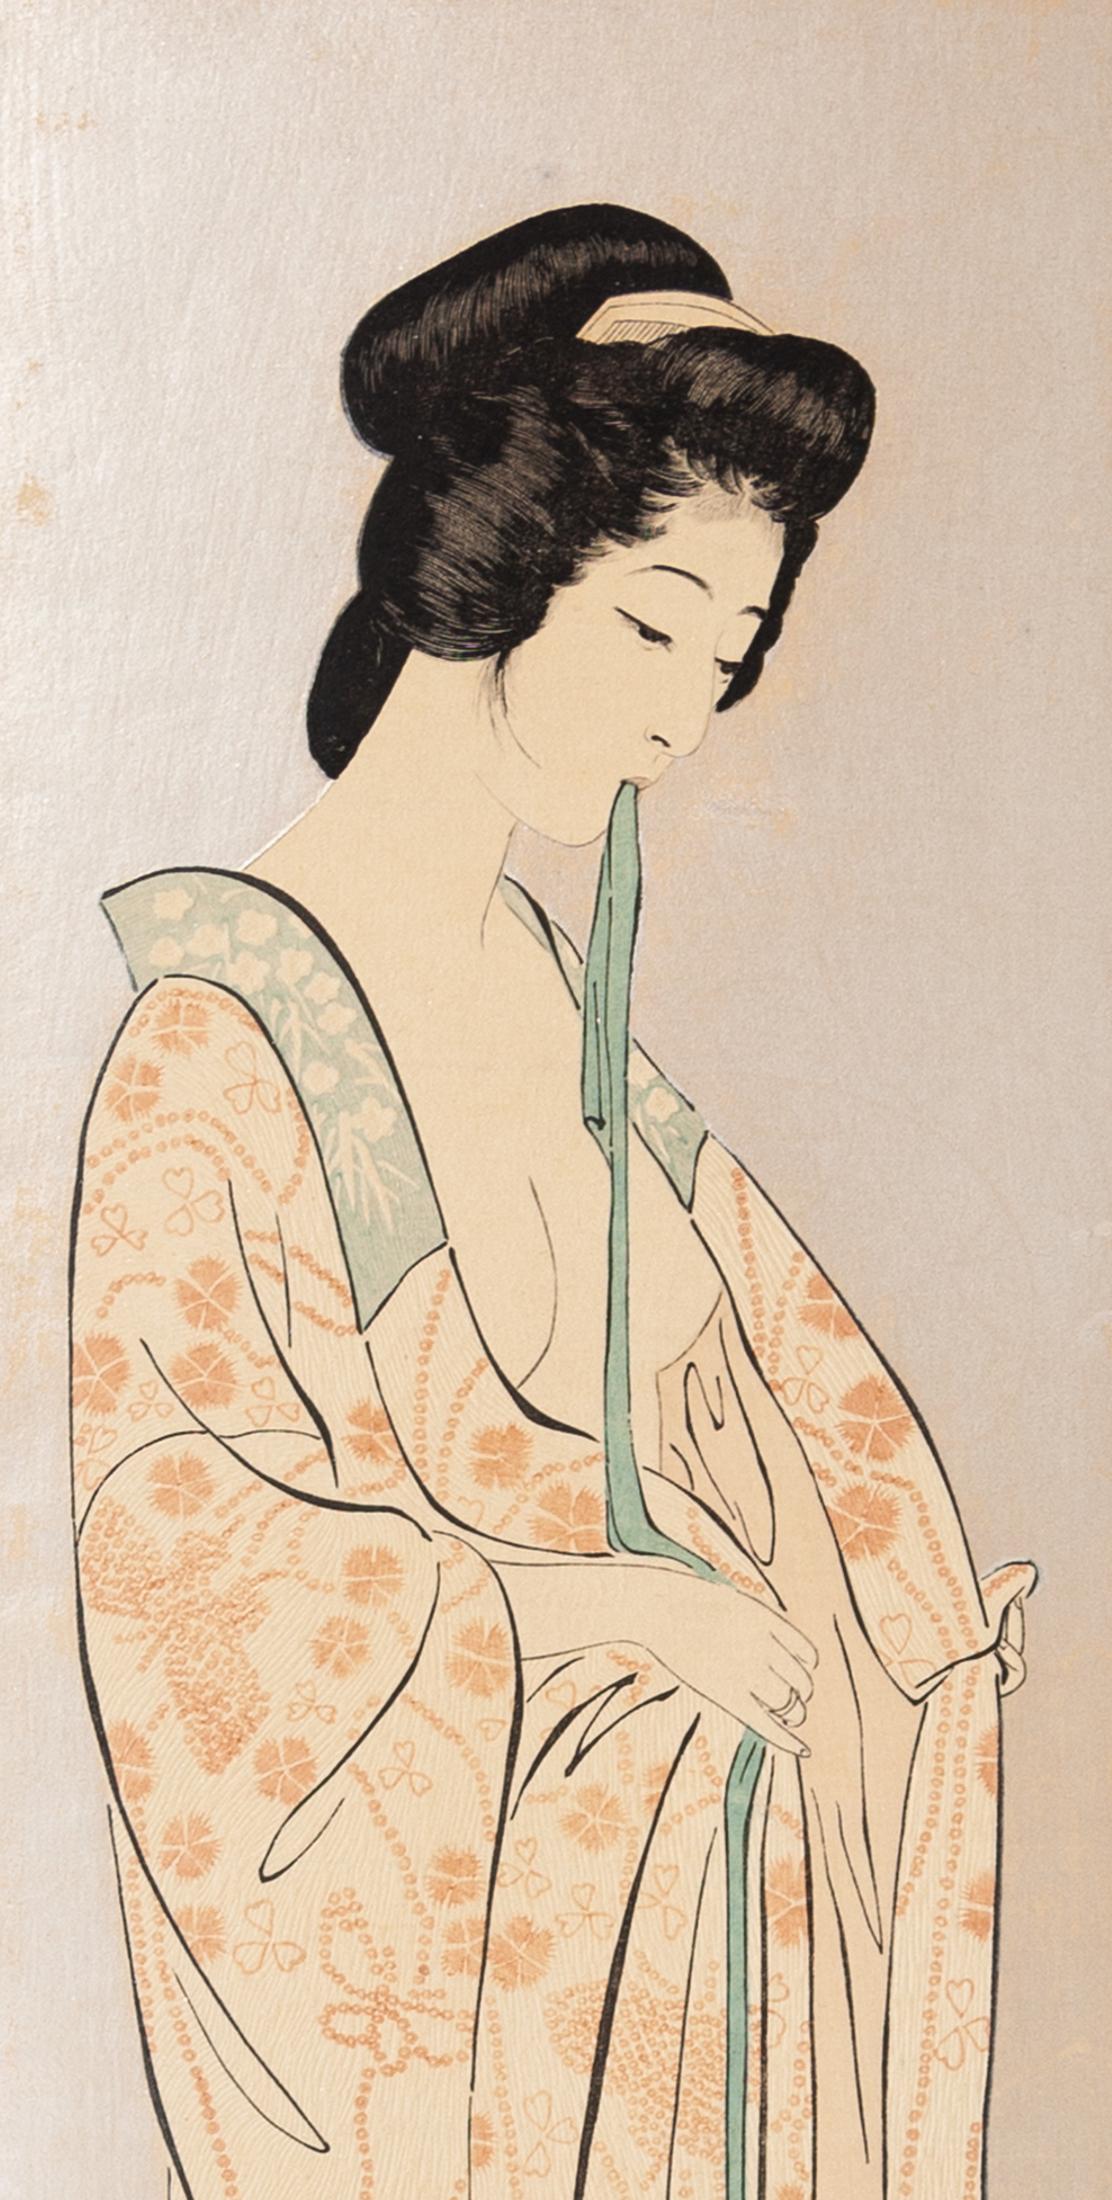 Artist: Goyo Hashiguchi (1880-1921)
Title: Woman in a Long Undergarment 
Publisher: Self-published 
Date: 1920
Dimensions: 14.7 x 49.2 cm 
Condition: Some creases and mica abraded. Backed. Slight fading and discolouring due to previous mounting.